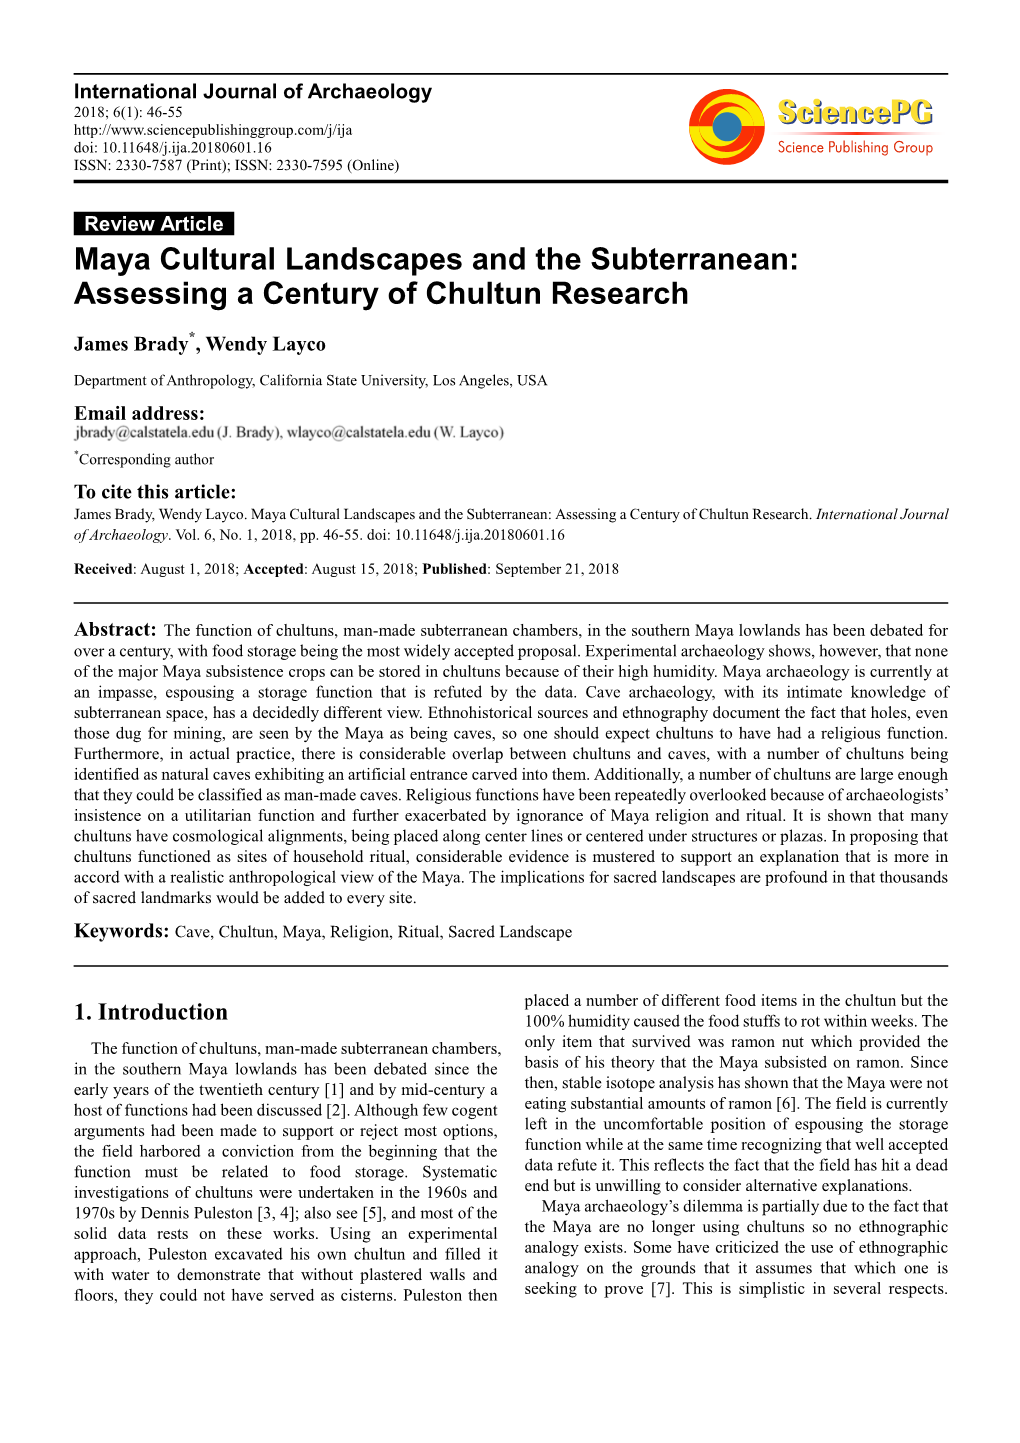 Maya Cultural Landscapes and the Subterranean: Assessing a Century of Chultun Research